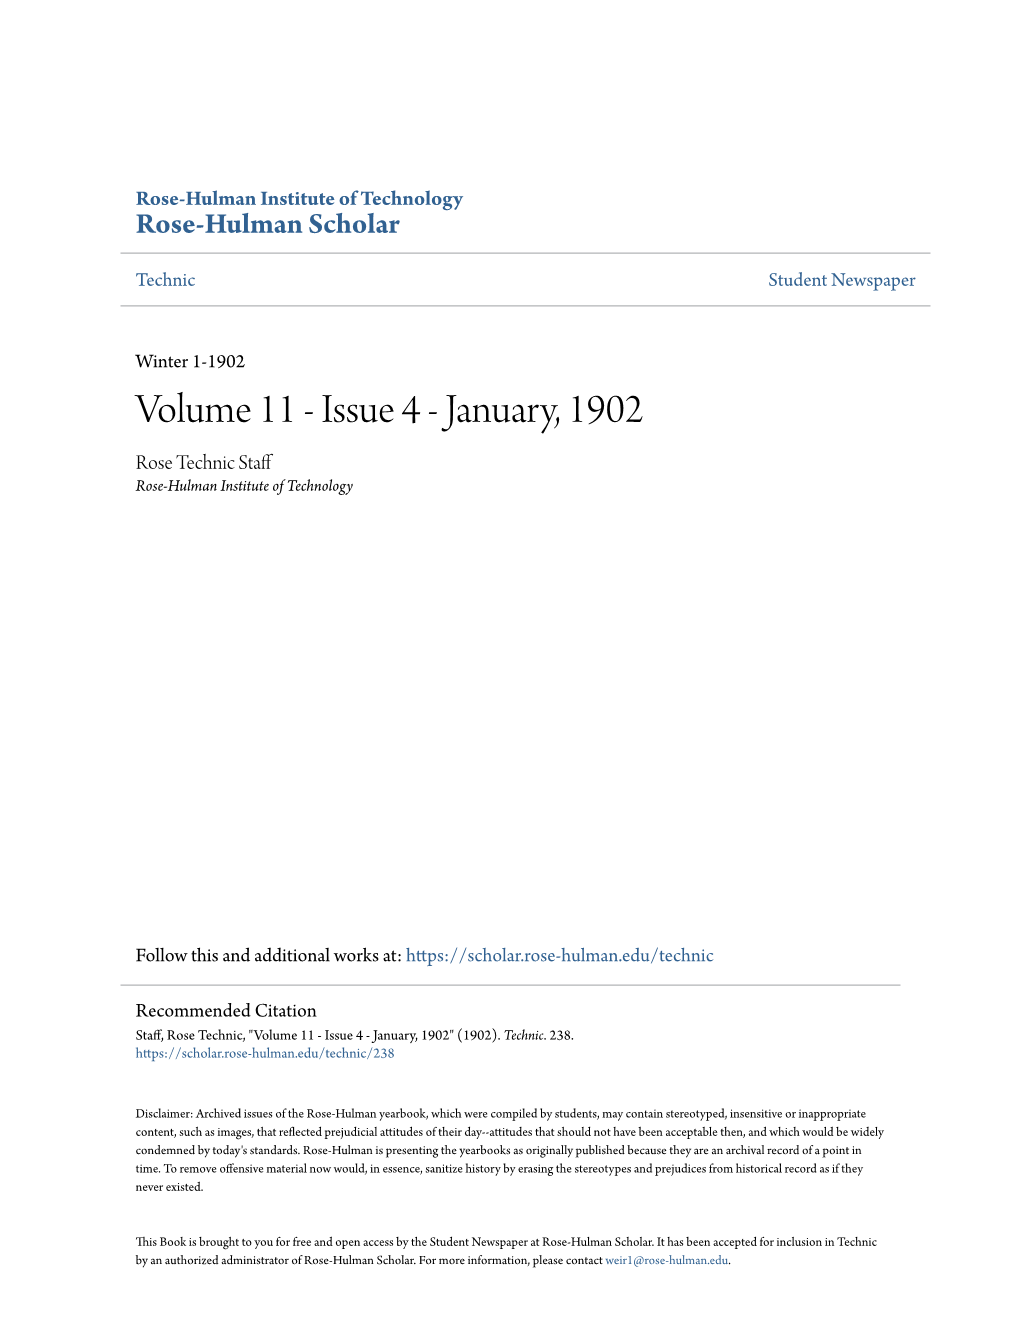 Volume 11 - Issue 4 - January, 1902 Rose Technic Staff Rose-Hulman Institute of Technology